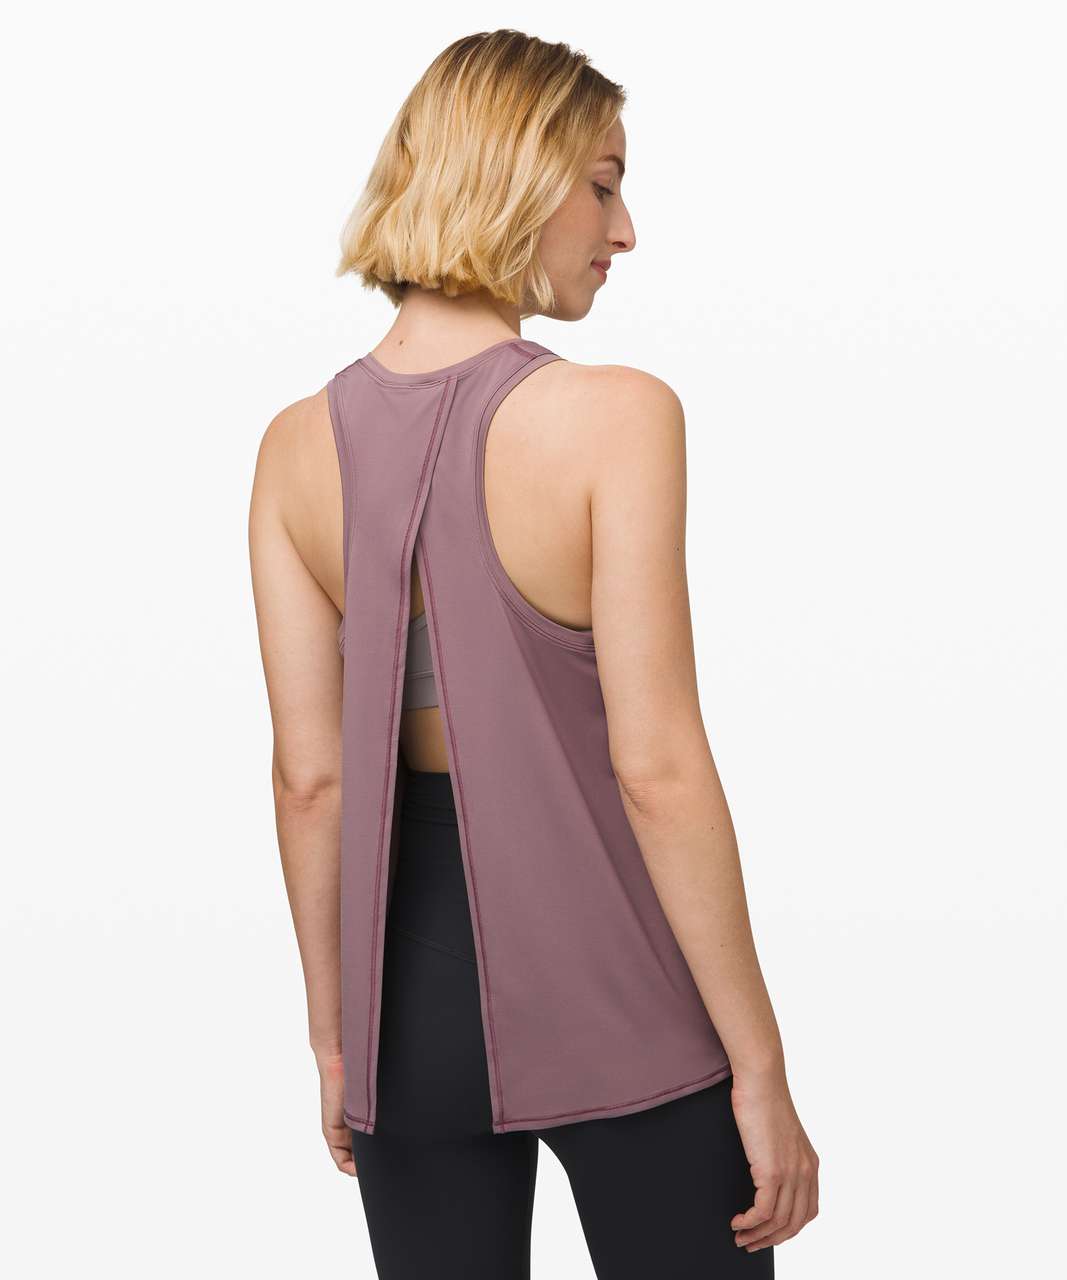 Lululemon All Tied Up Tank *No-stink Zinc - Frosted Mulberry